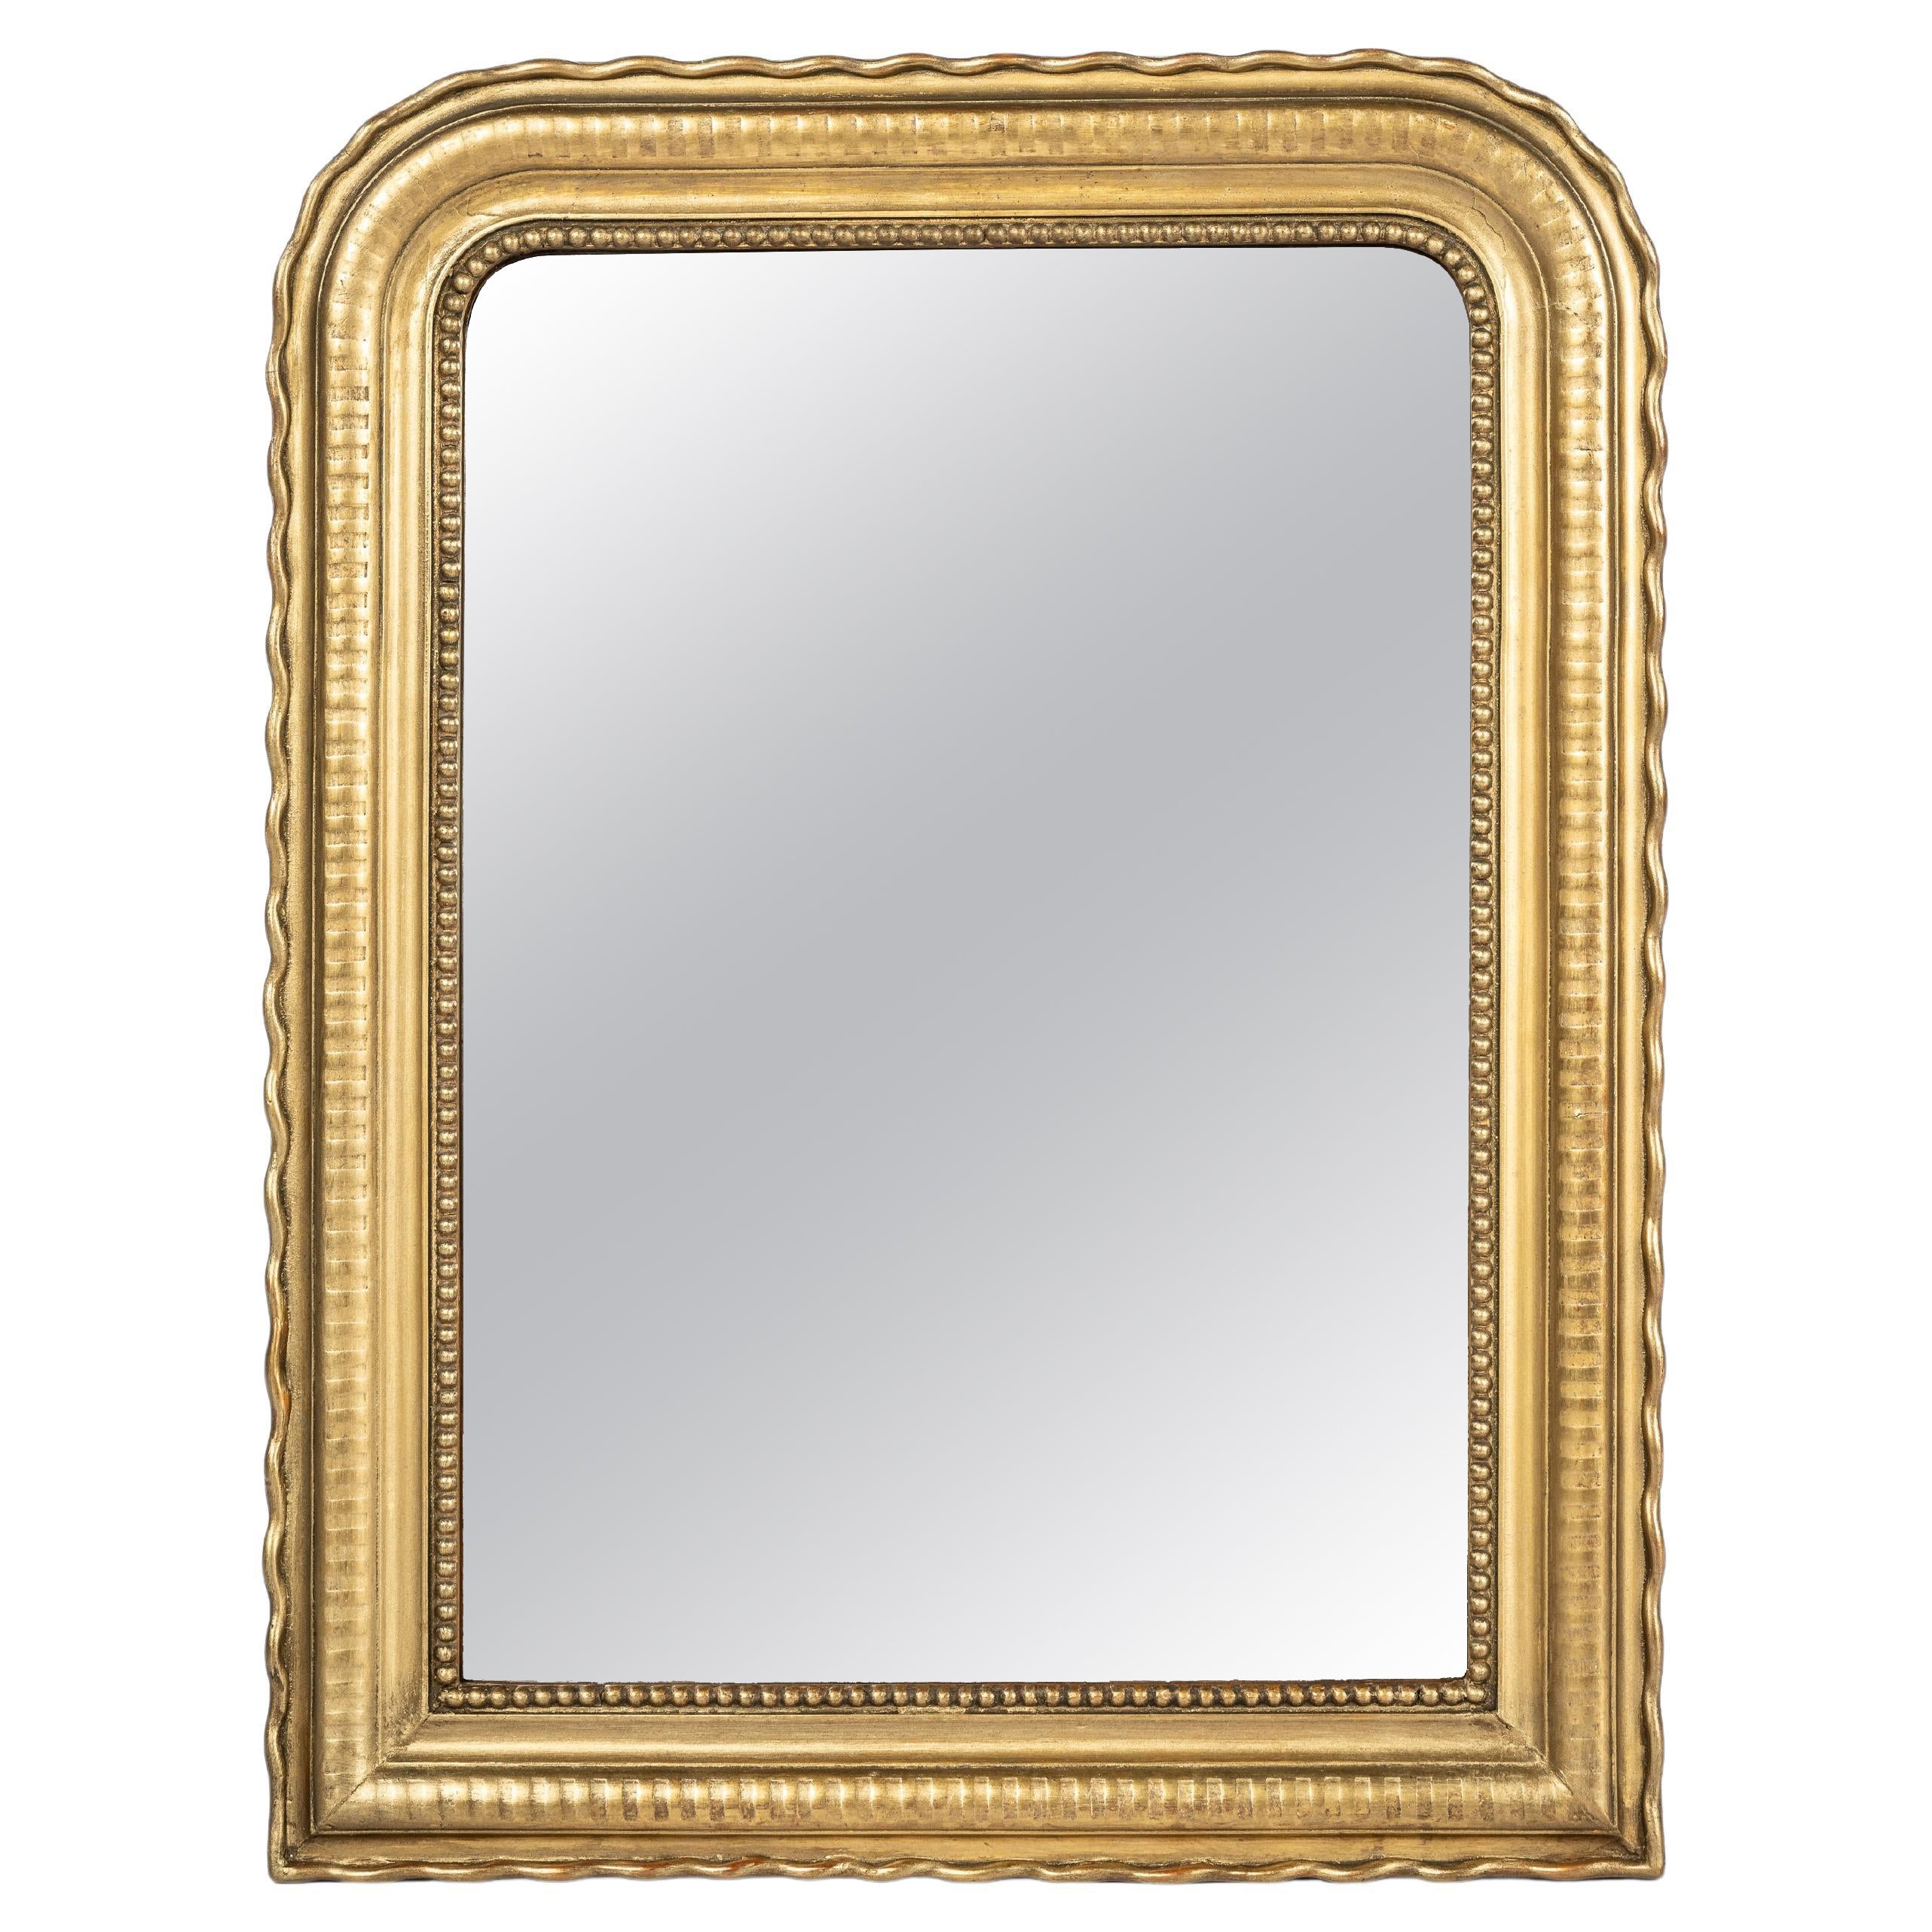 Antique Late 19th-century French gold leaf gilt striped Louis Philippe mirror